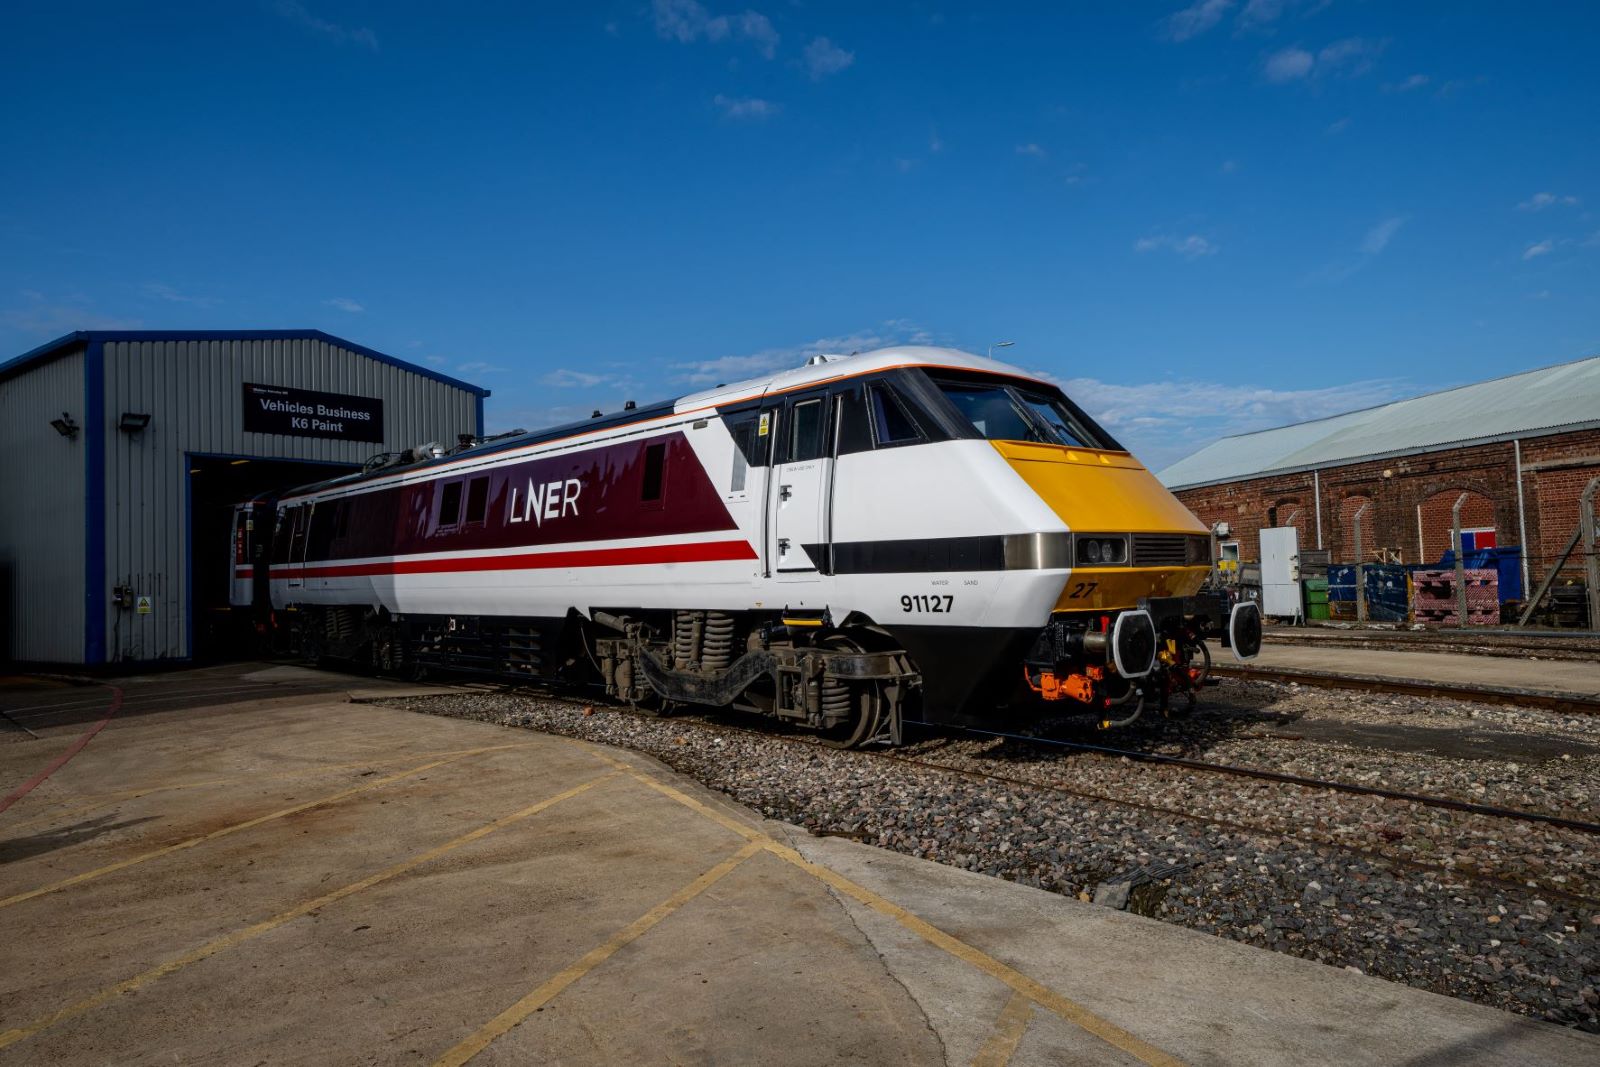 New Livery For LNER Intercity 225 Fleet As Part Of Essential Maintenance 